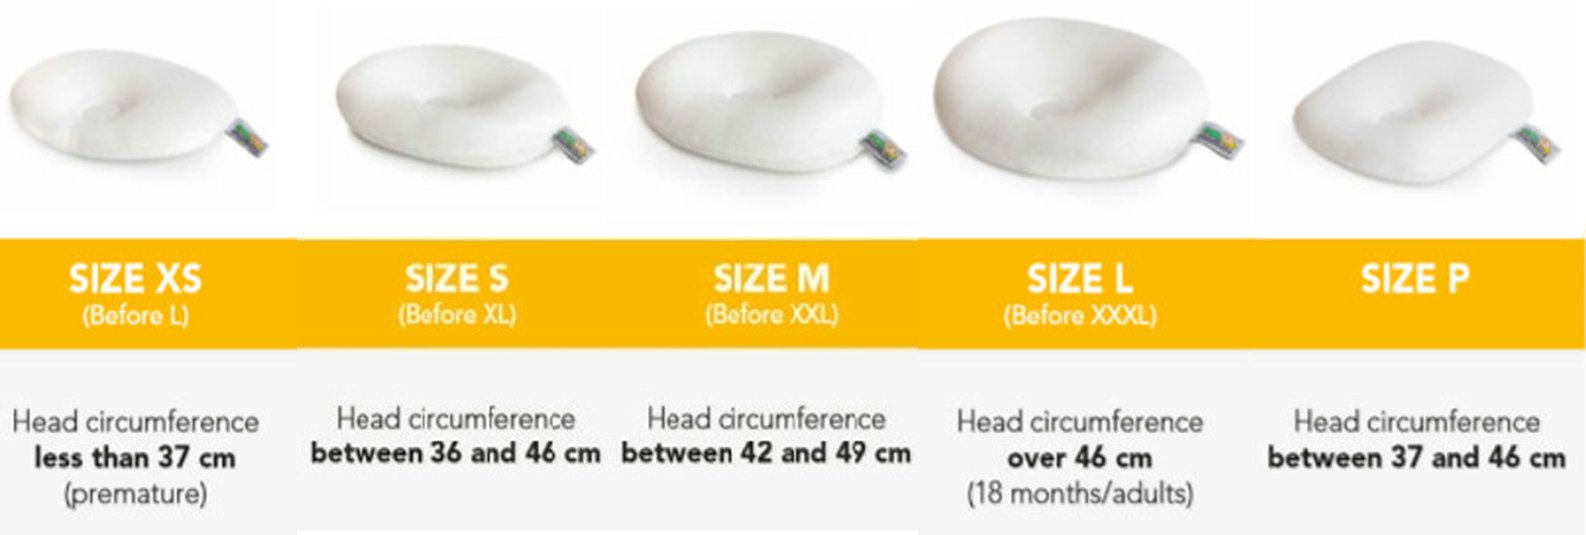 Mimos Baby Pillow Size Guide